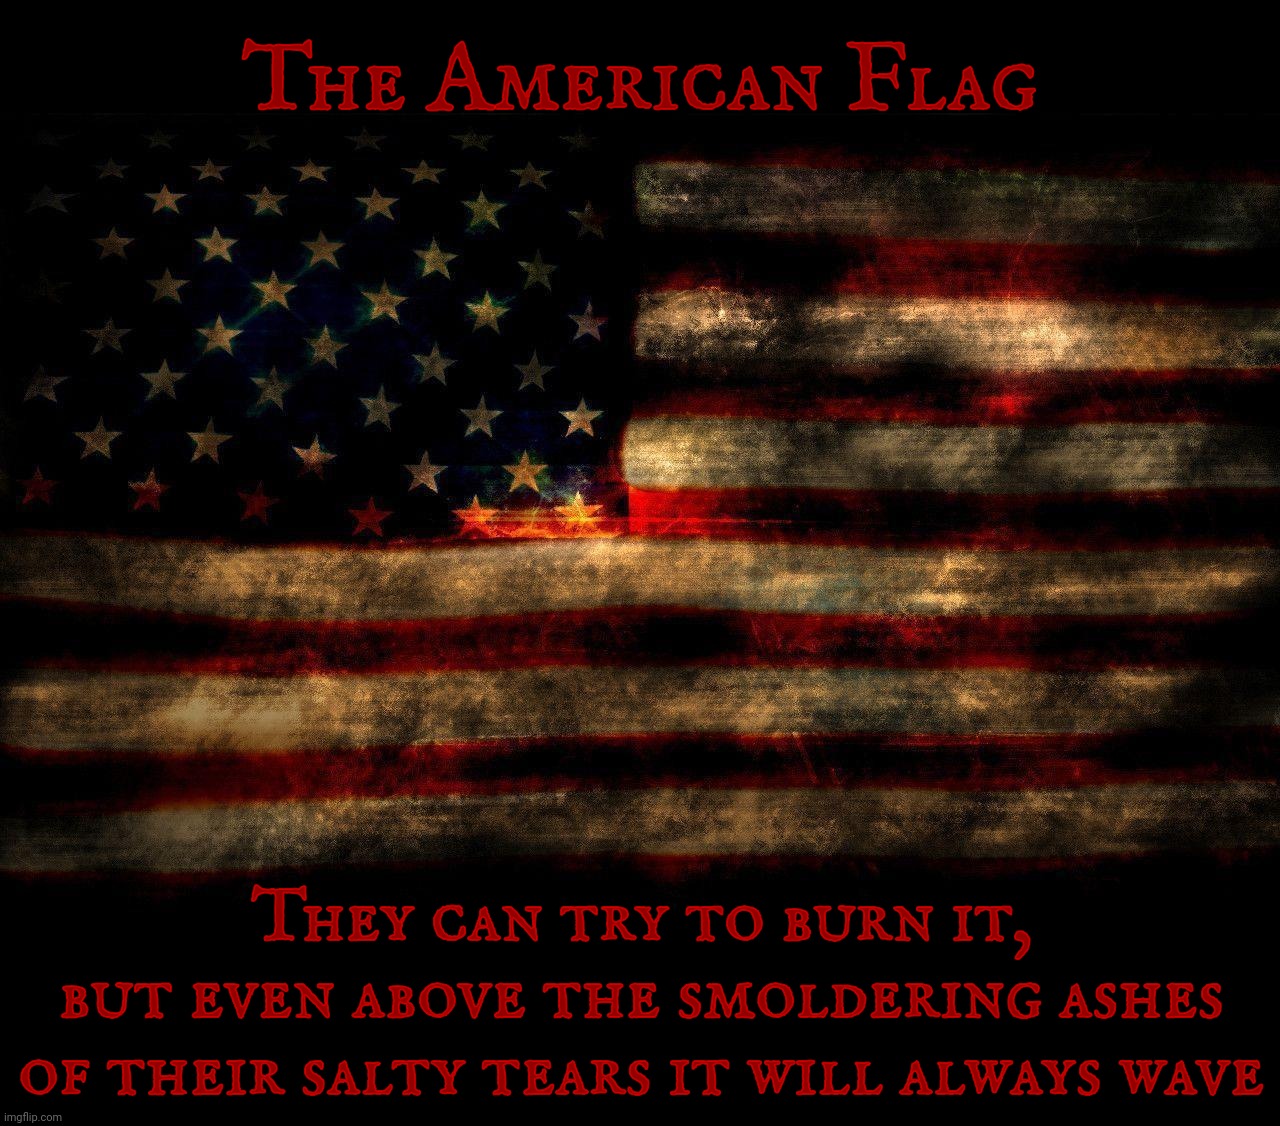 USA Flag Lg 1280 x 1024 | The American Flag They can try to burn it,
but even above the smoldering ashes
of their salty tears it will always wave | image tagged in usa flag lg 1280 x 1024 | made w/ Imgflip meme maker